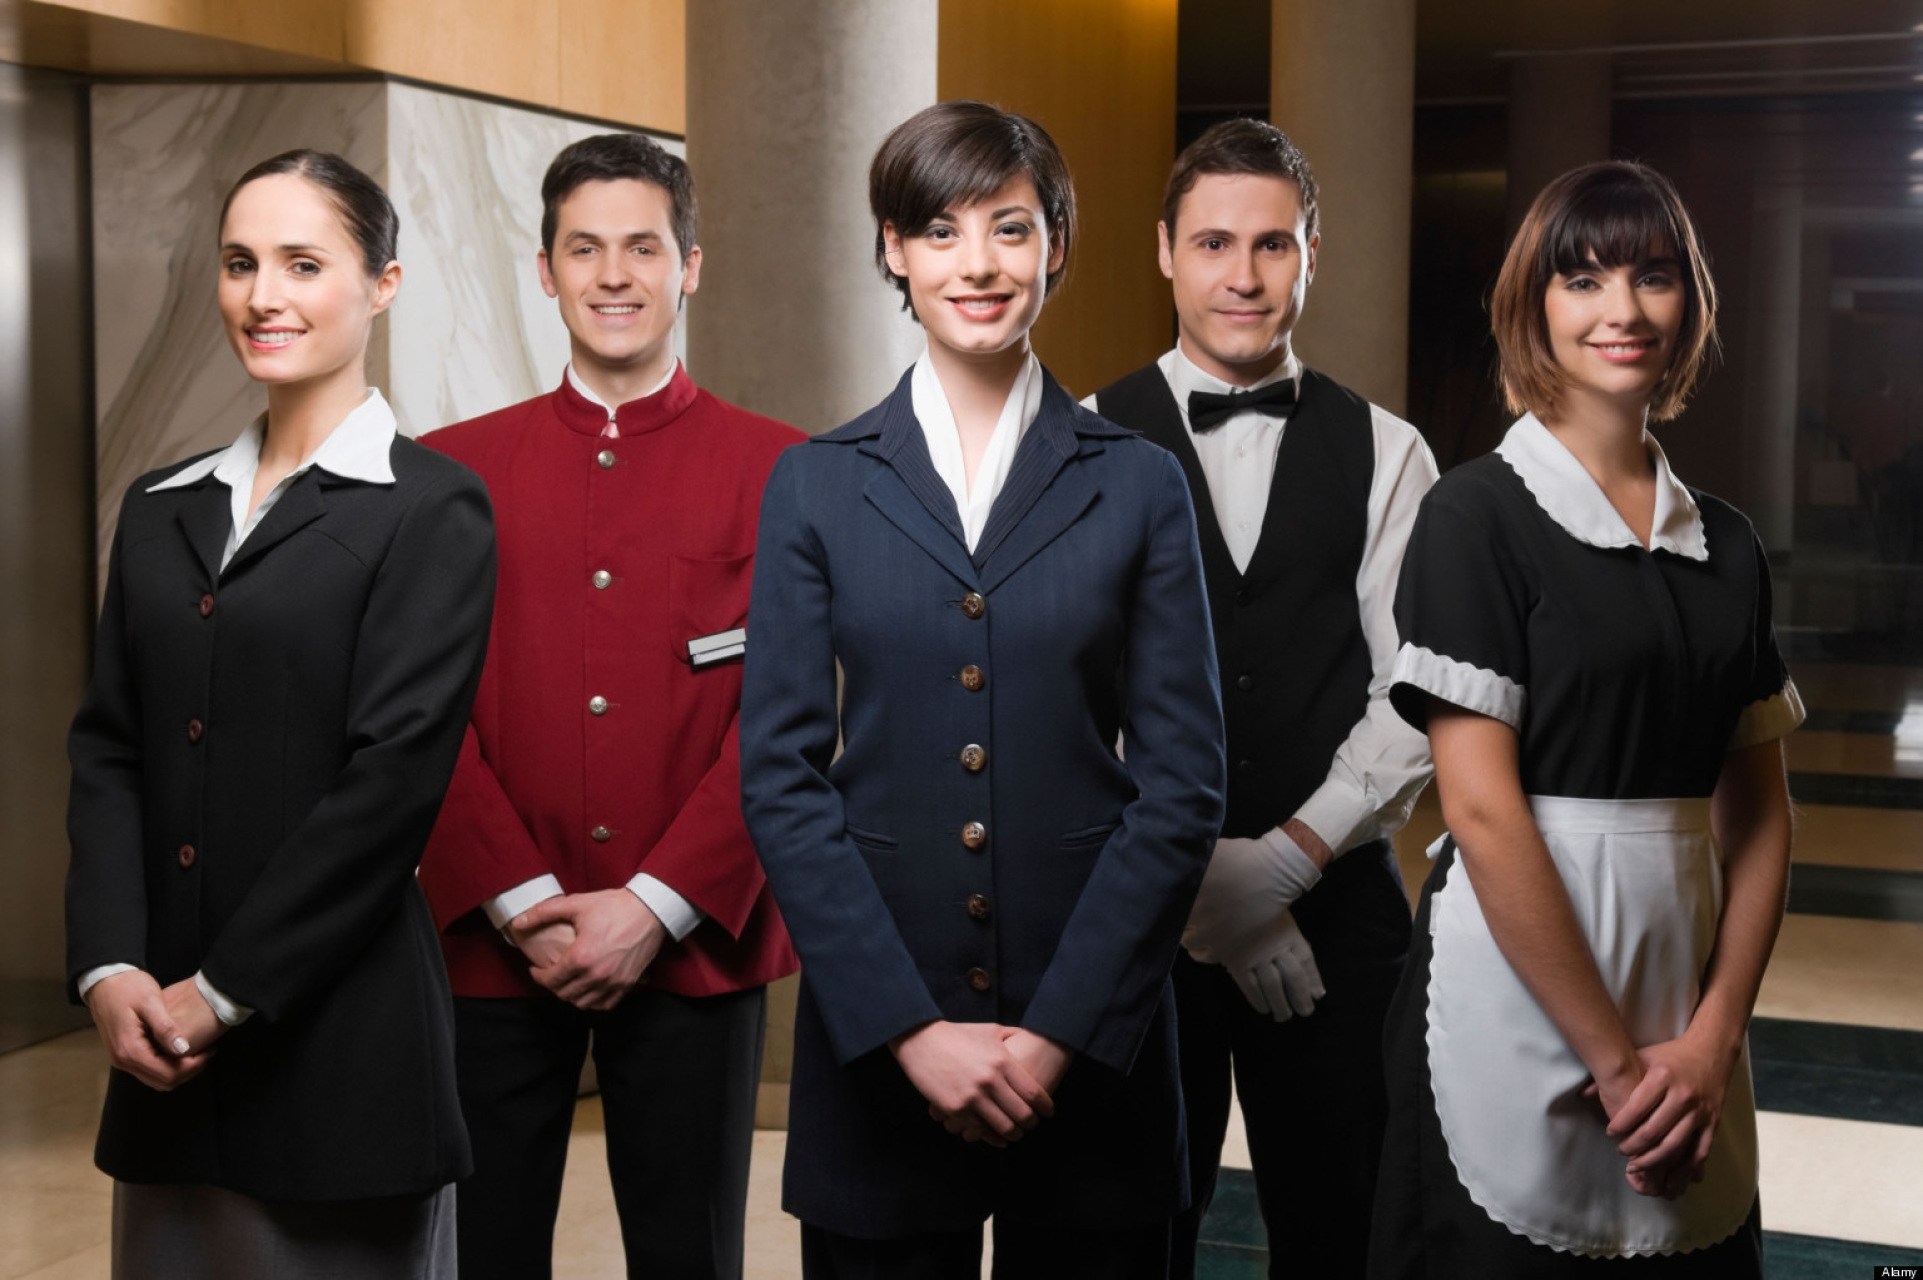 Reputable Operators in the hospitality industry